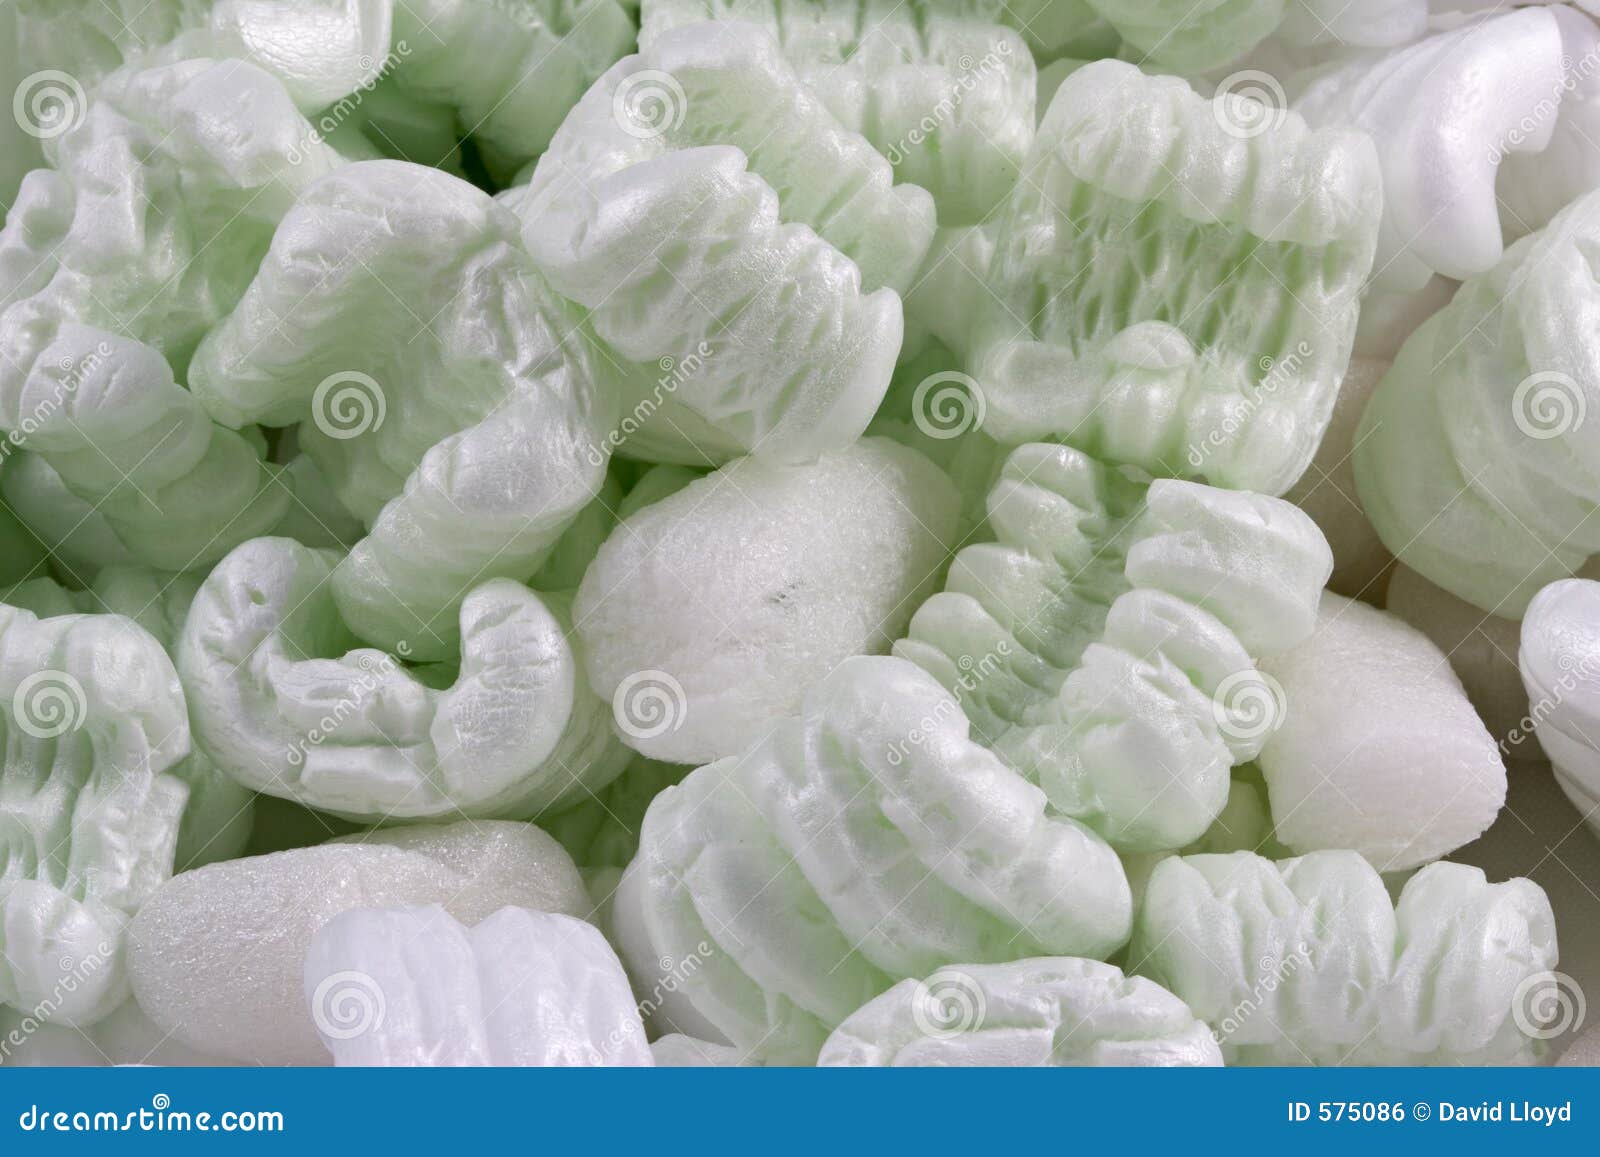 5+ Hundred Chips Polystyrene Royalty-Free Images, Stock Photos & Pictures